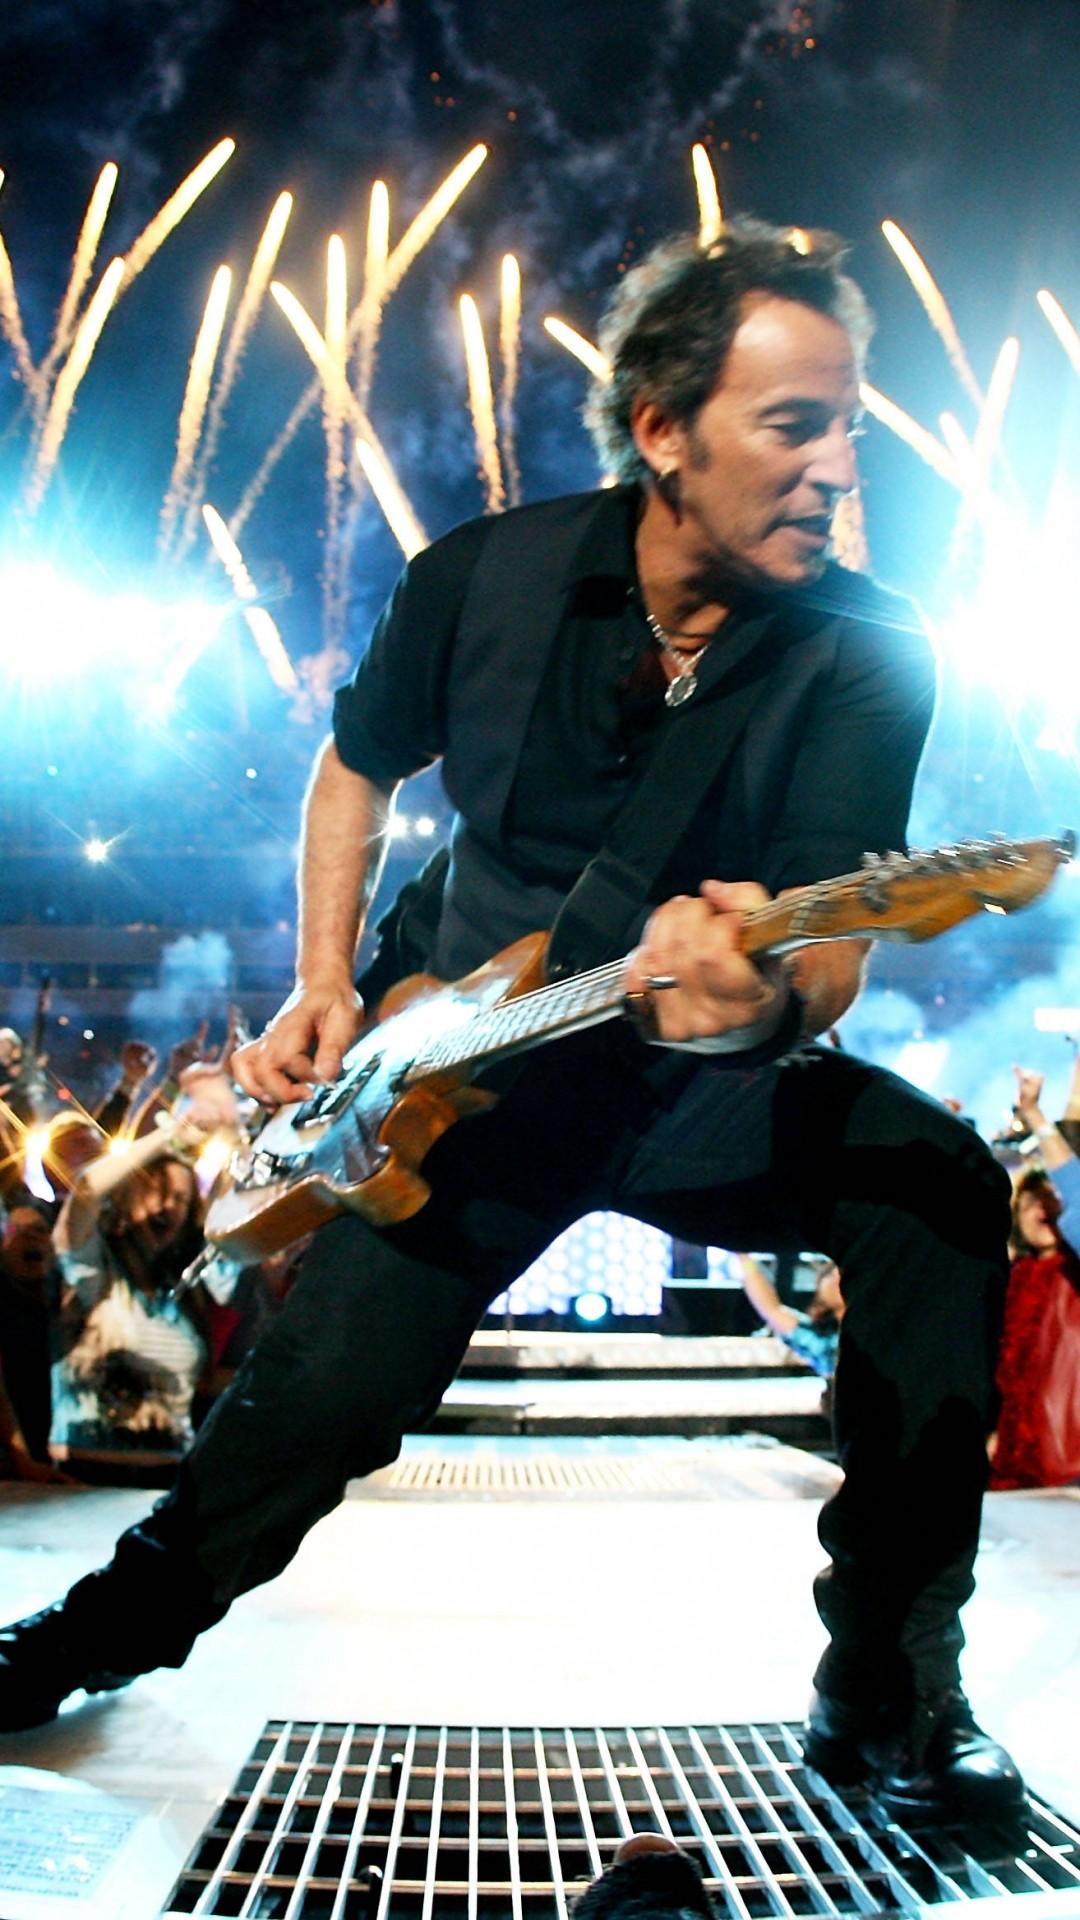 Bruce Springsteen Wallpaper background picture